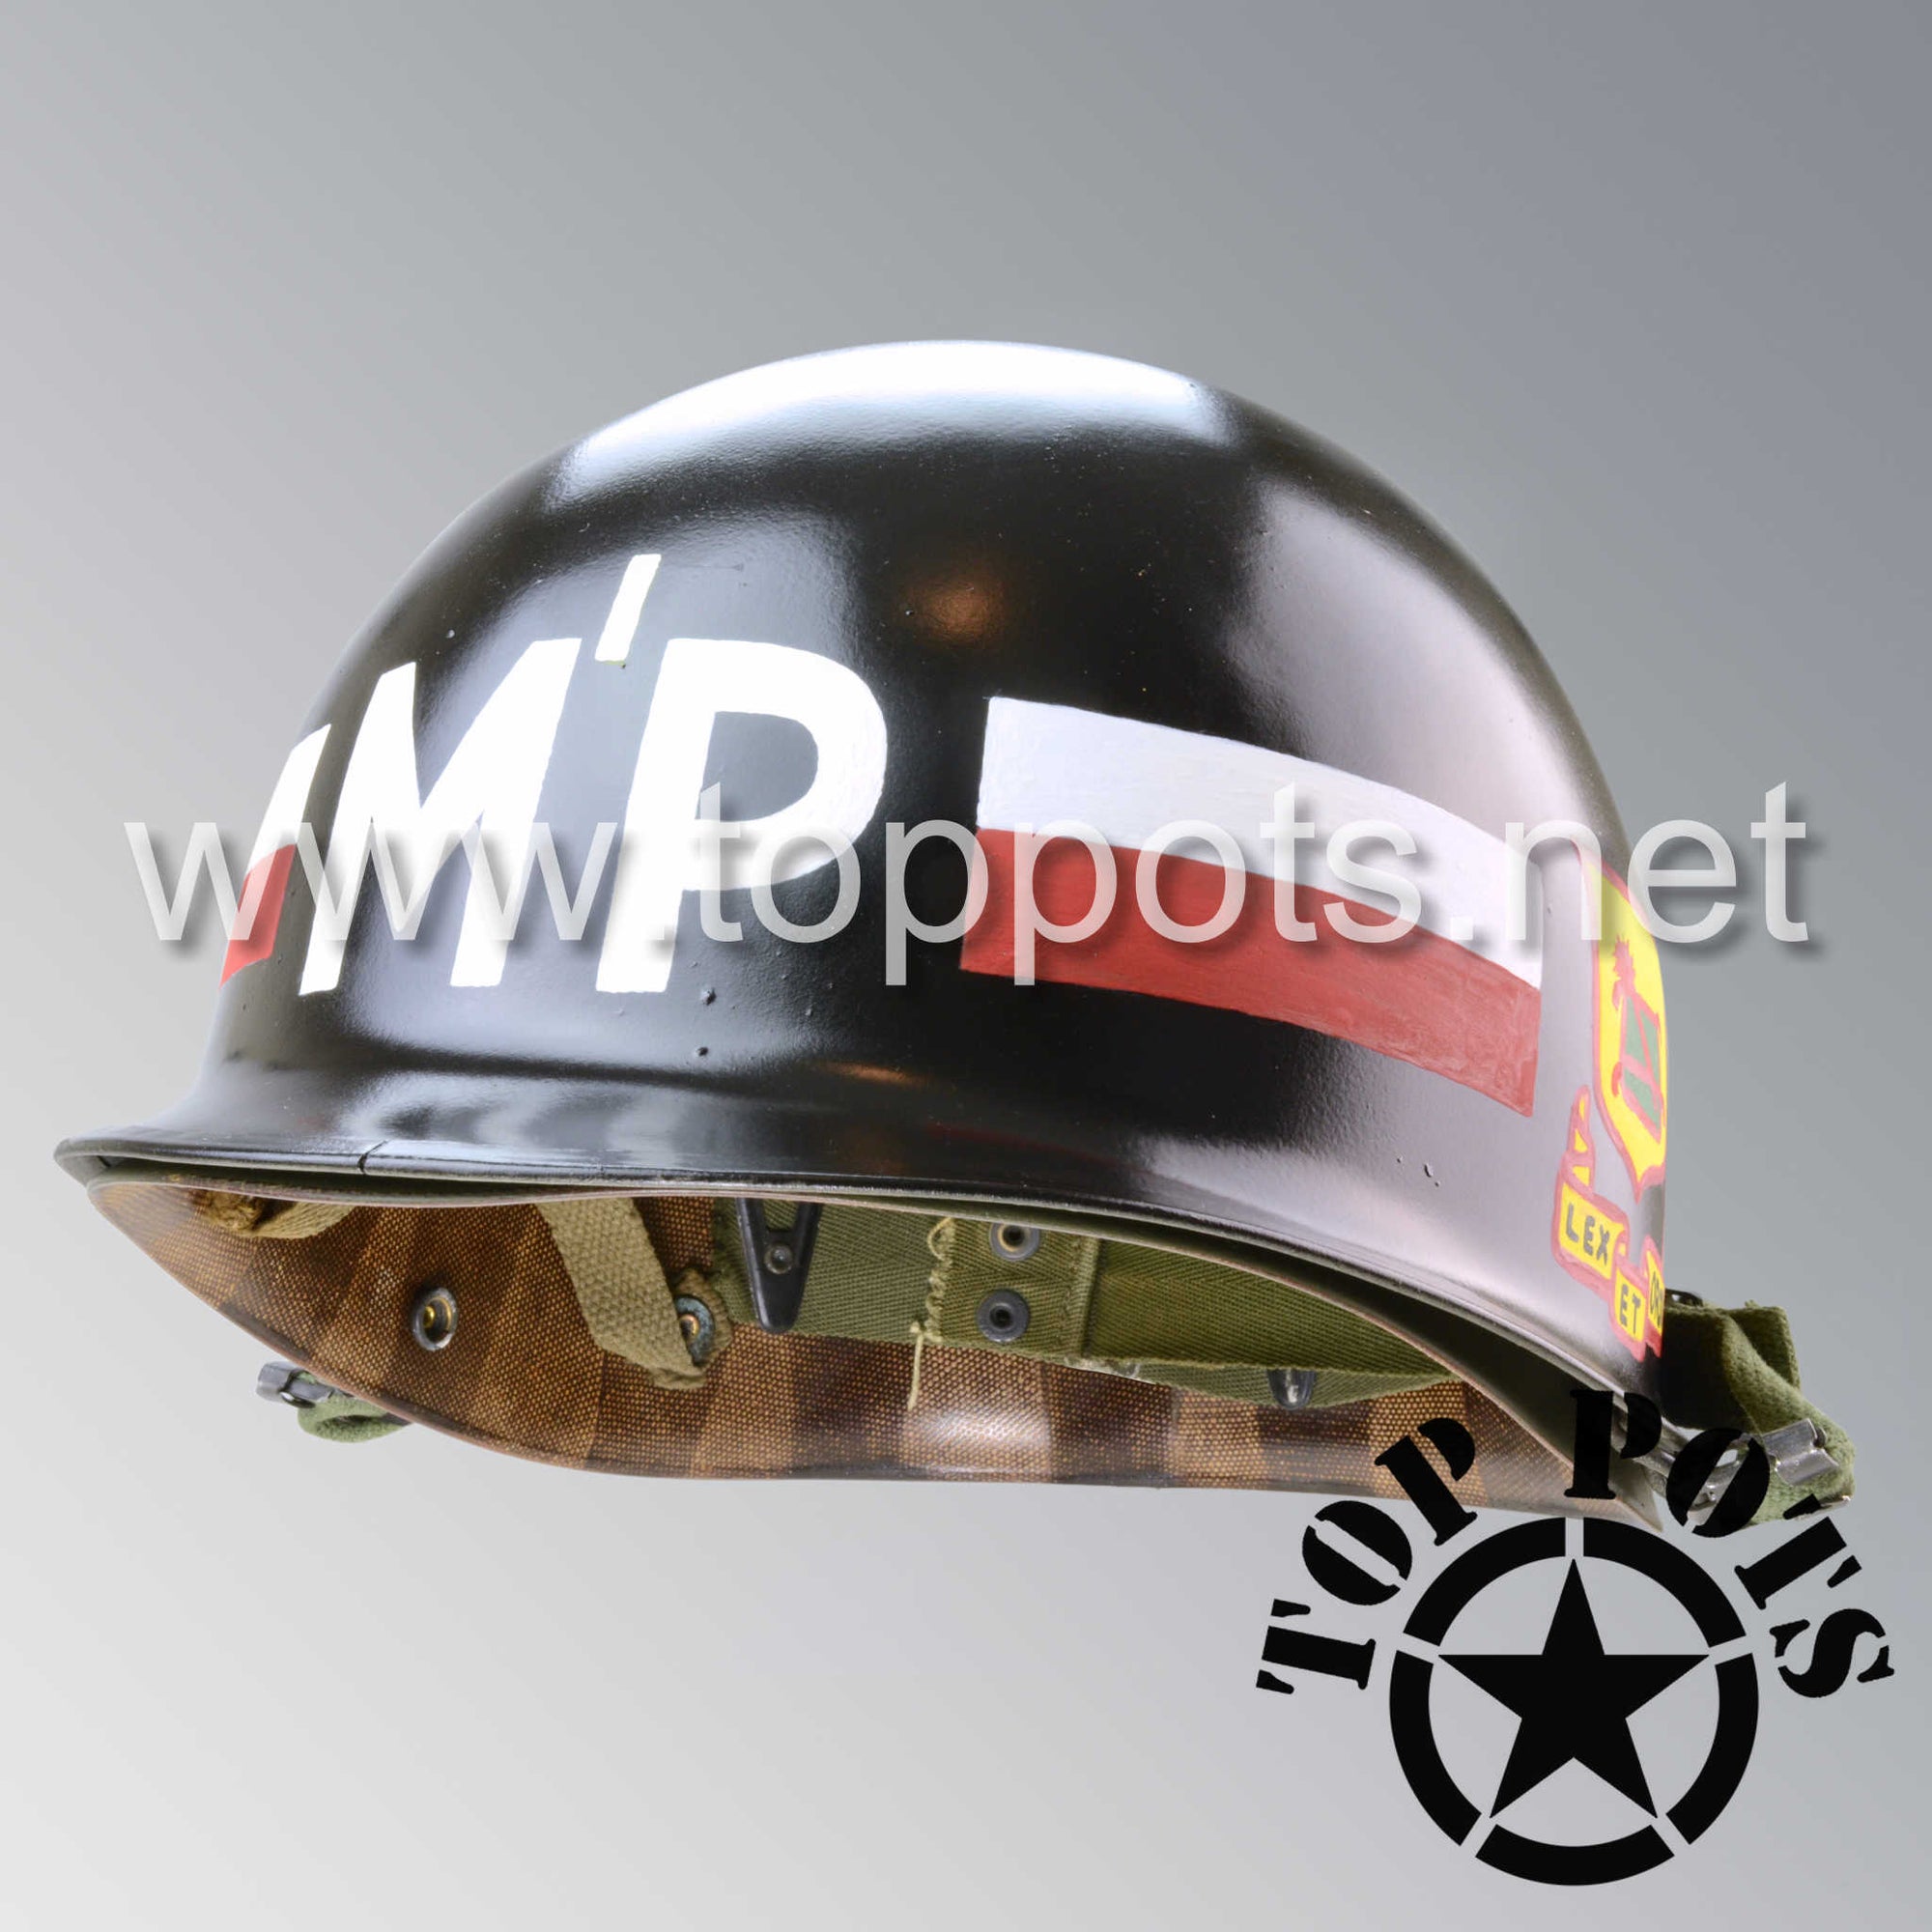 Vietnam War US Army Original M1 Infantry Helmet and Liner with 76th MP Battalion 8th Military Police Brigade Emblem